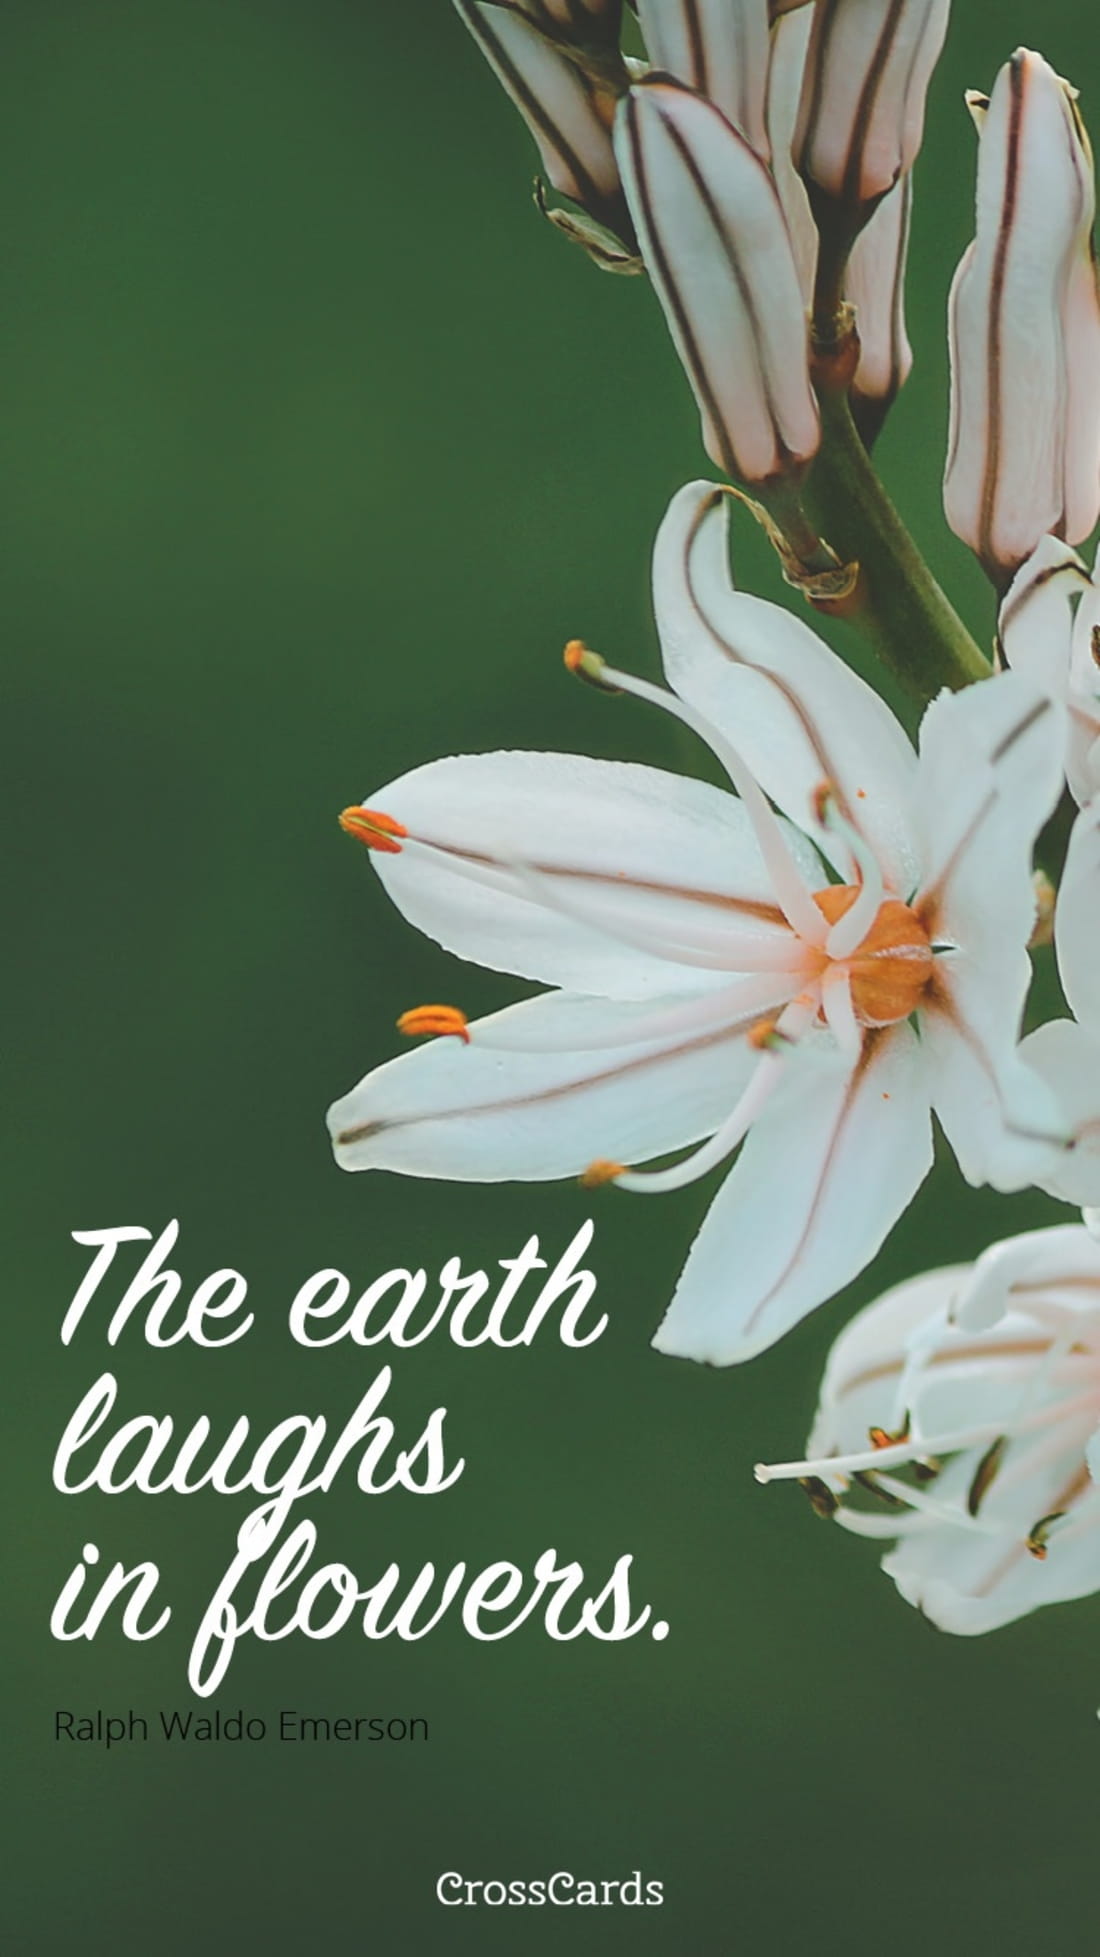 The Earth Laughs in Flowers mobile phone wallpaper